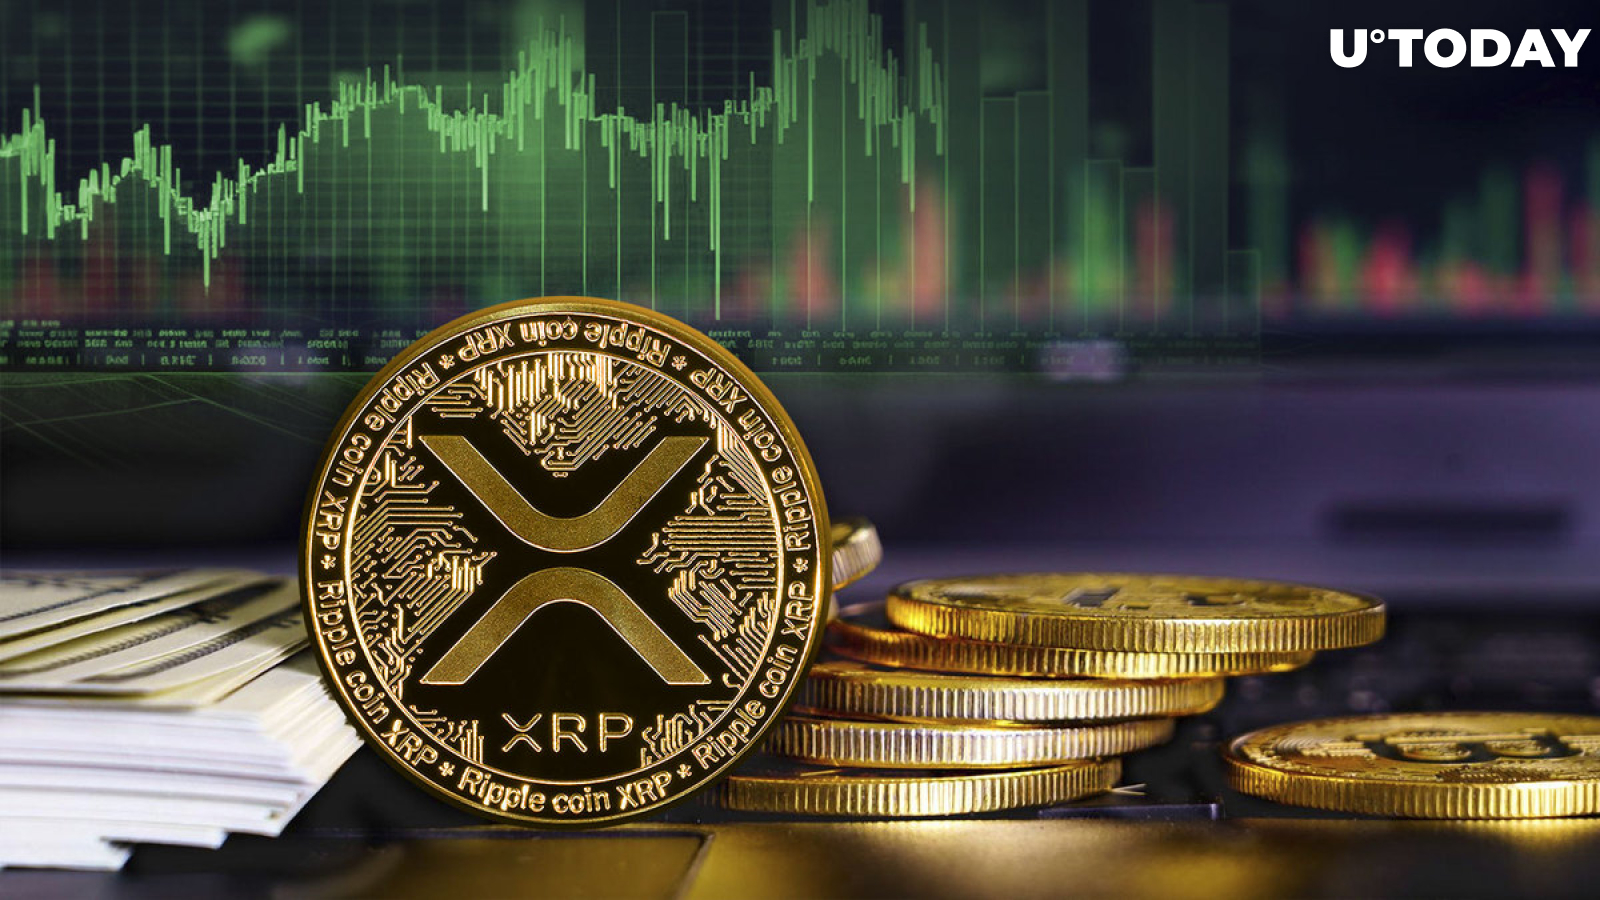 XRP Adds $2 Billion to Market Cap as XRP Price Suddenly Pumps